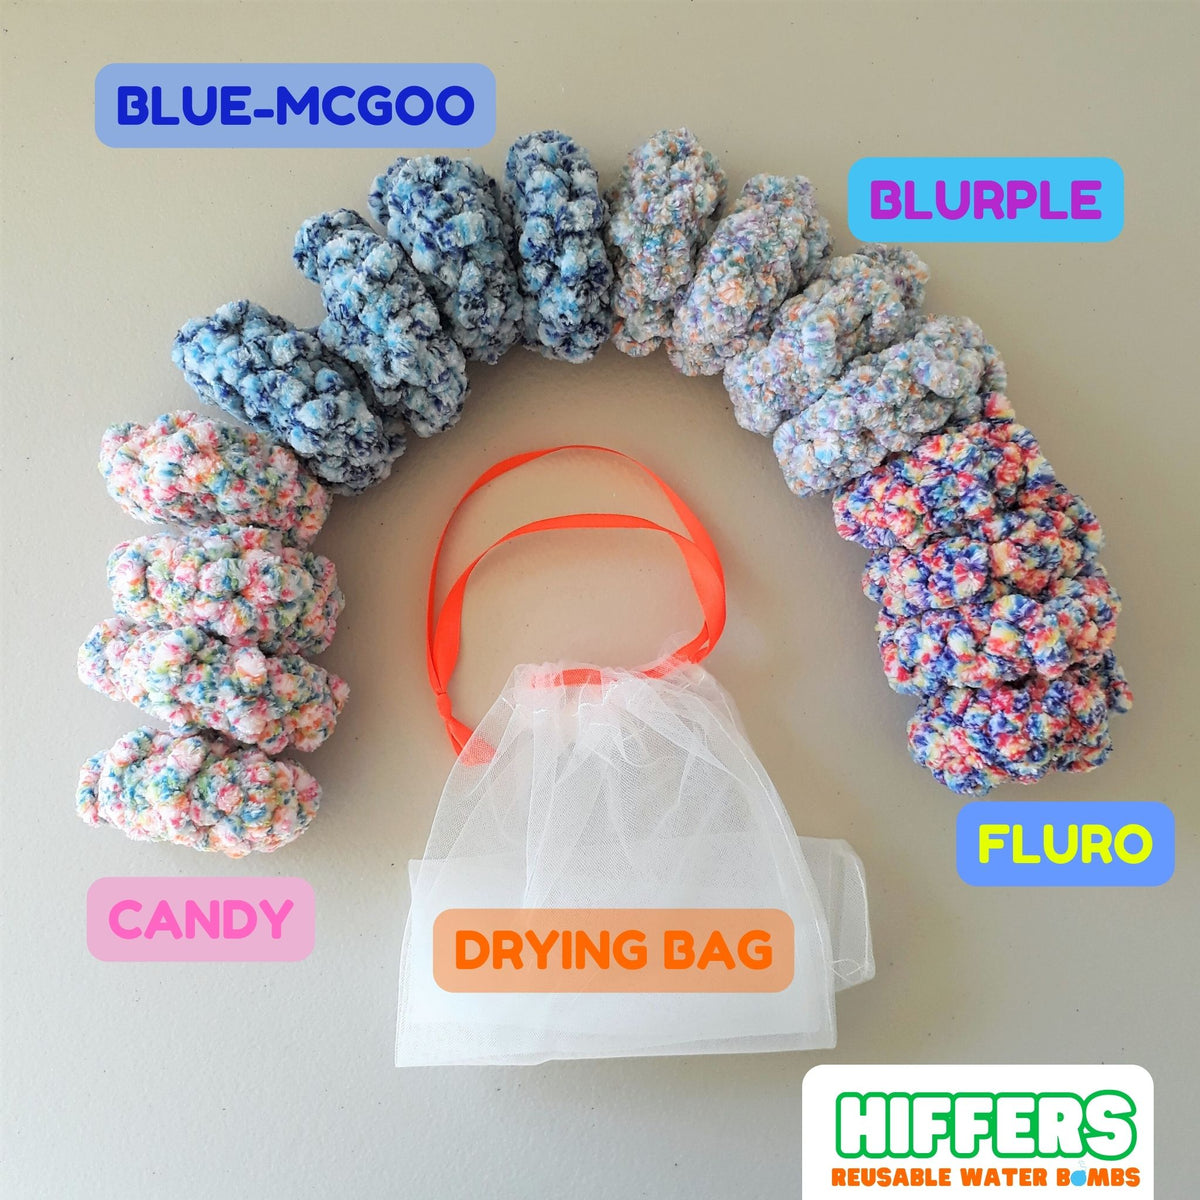 Hiffers - Reusable Water Bombs - Candy